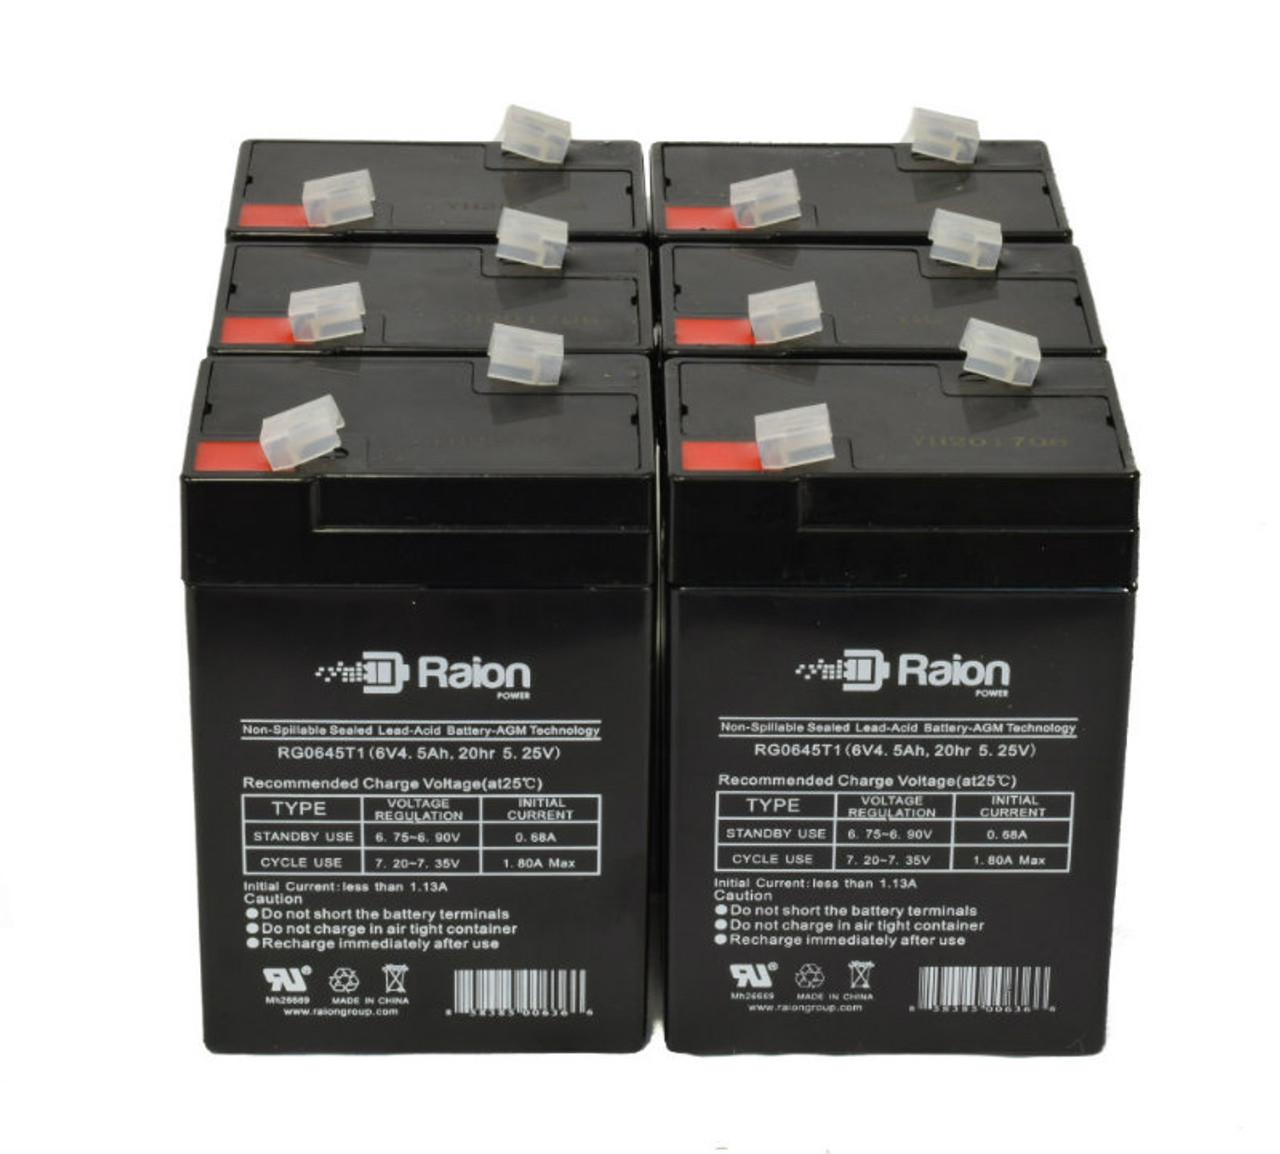 Raion Power 6 Volt 4.5Ah RG0645T1 Replacement Battery for Aokly Power 3-FM-5 - 6 Pack